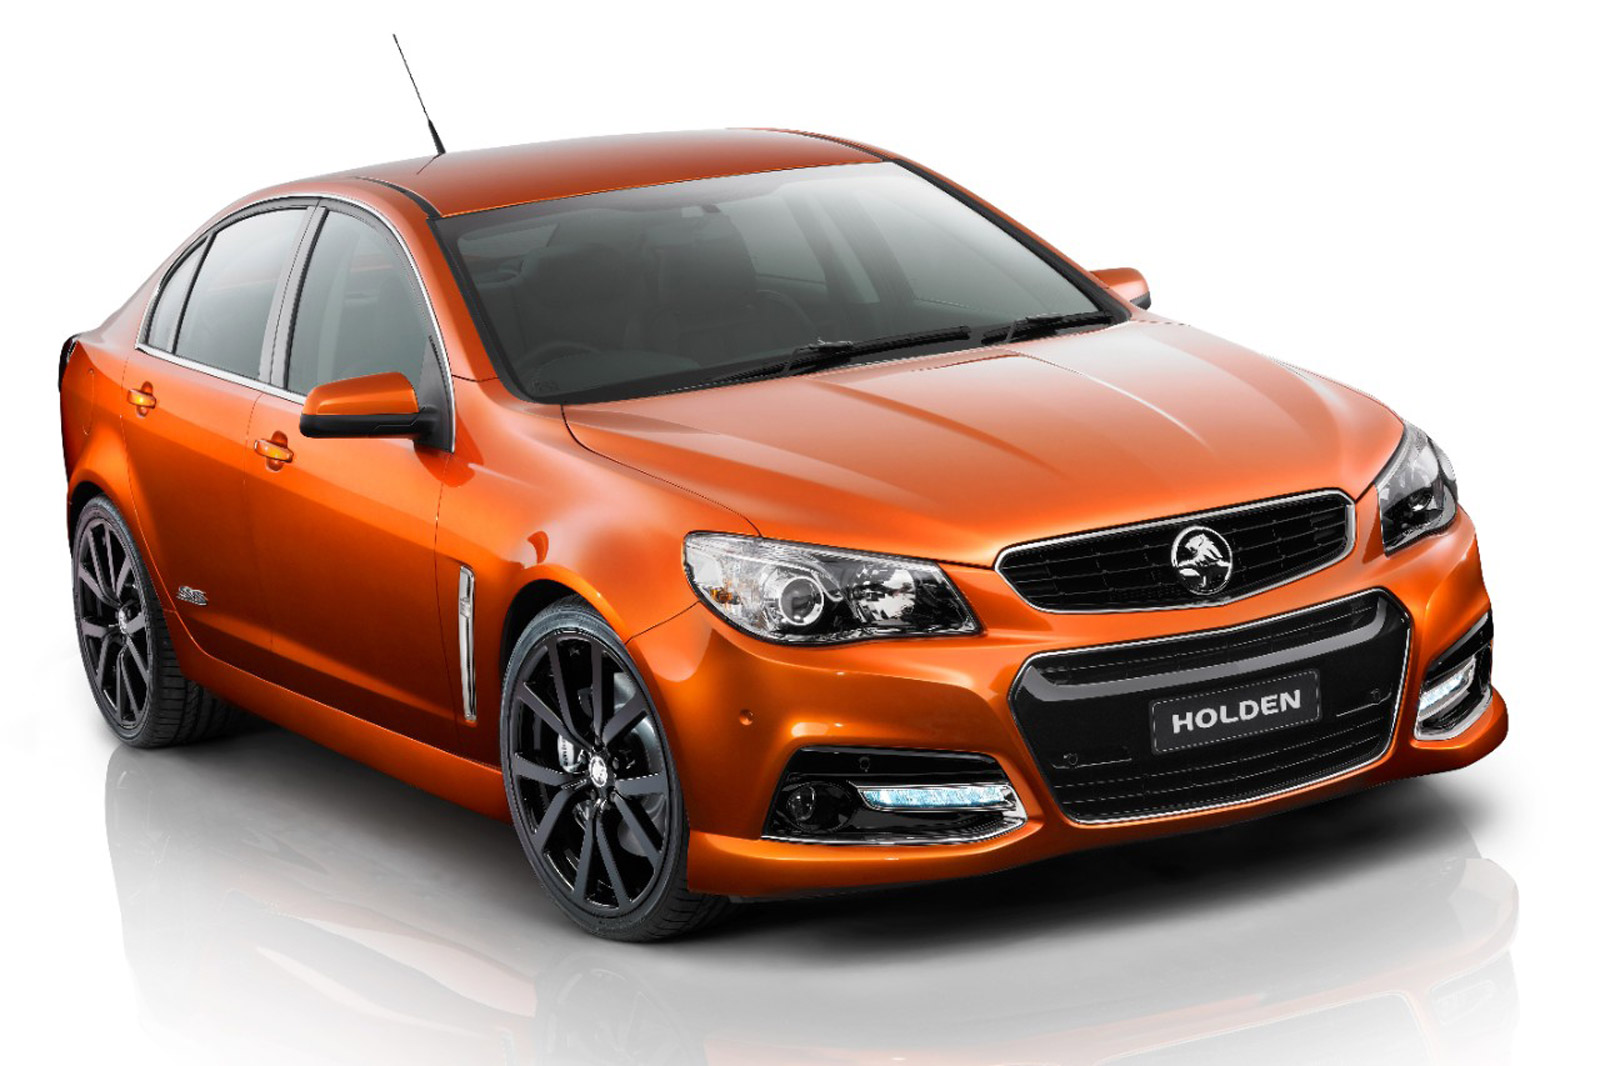 2014 Chevy SS gets closer with reveal of new Holden Commodore SS V